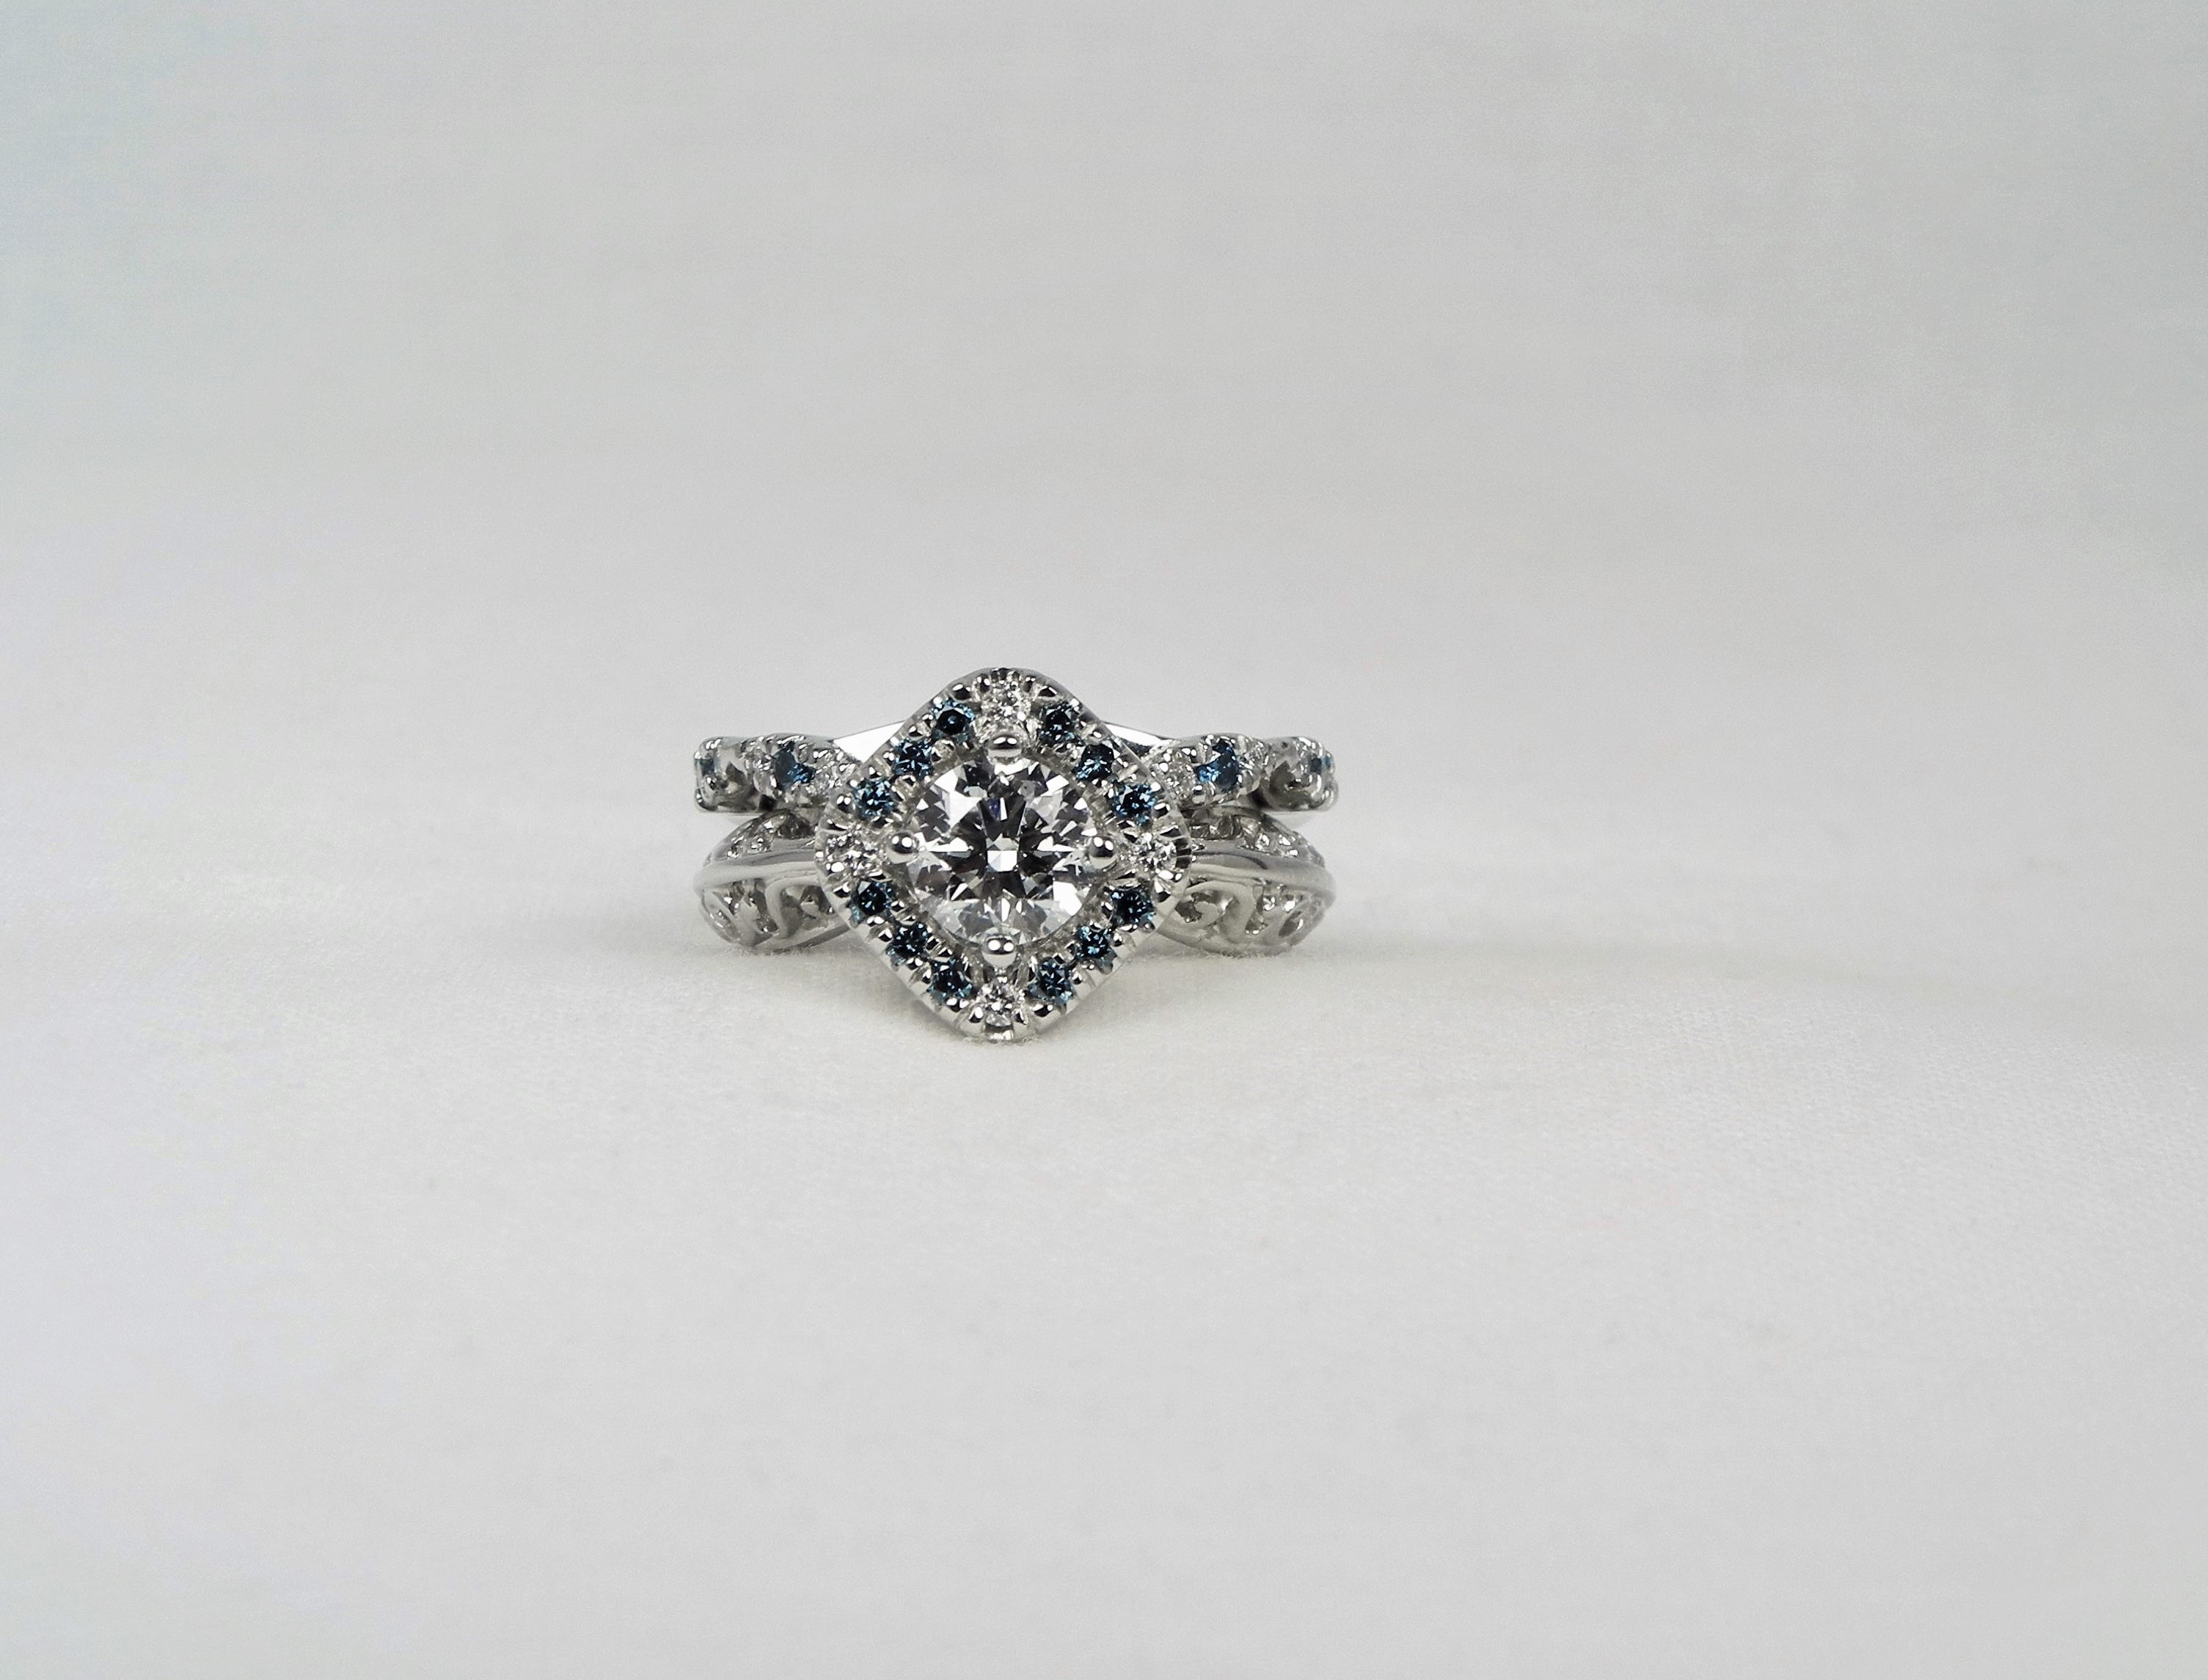 Allure Vintage and Sculptured Style Engagement Rings | KT Diamond Jewelers